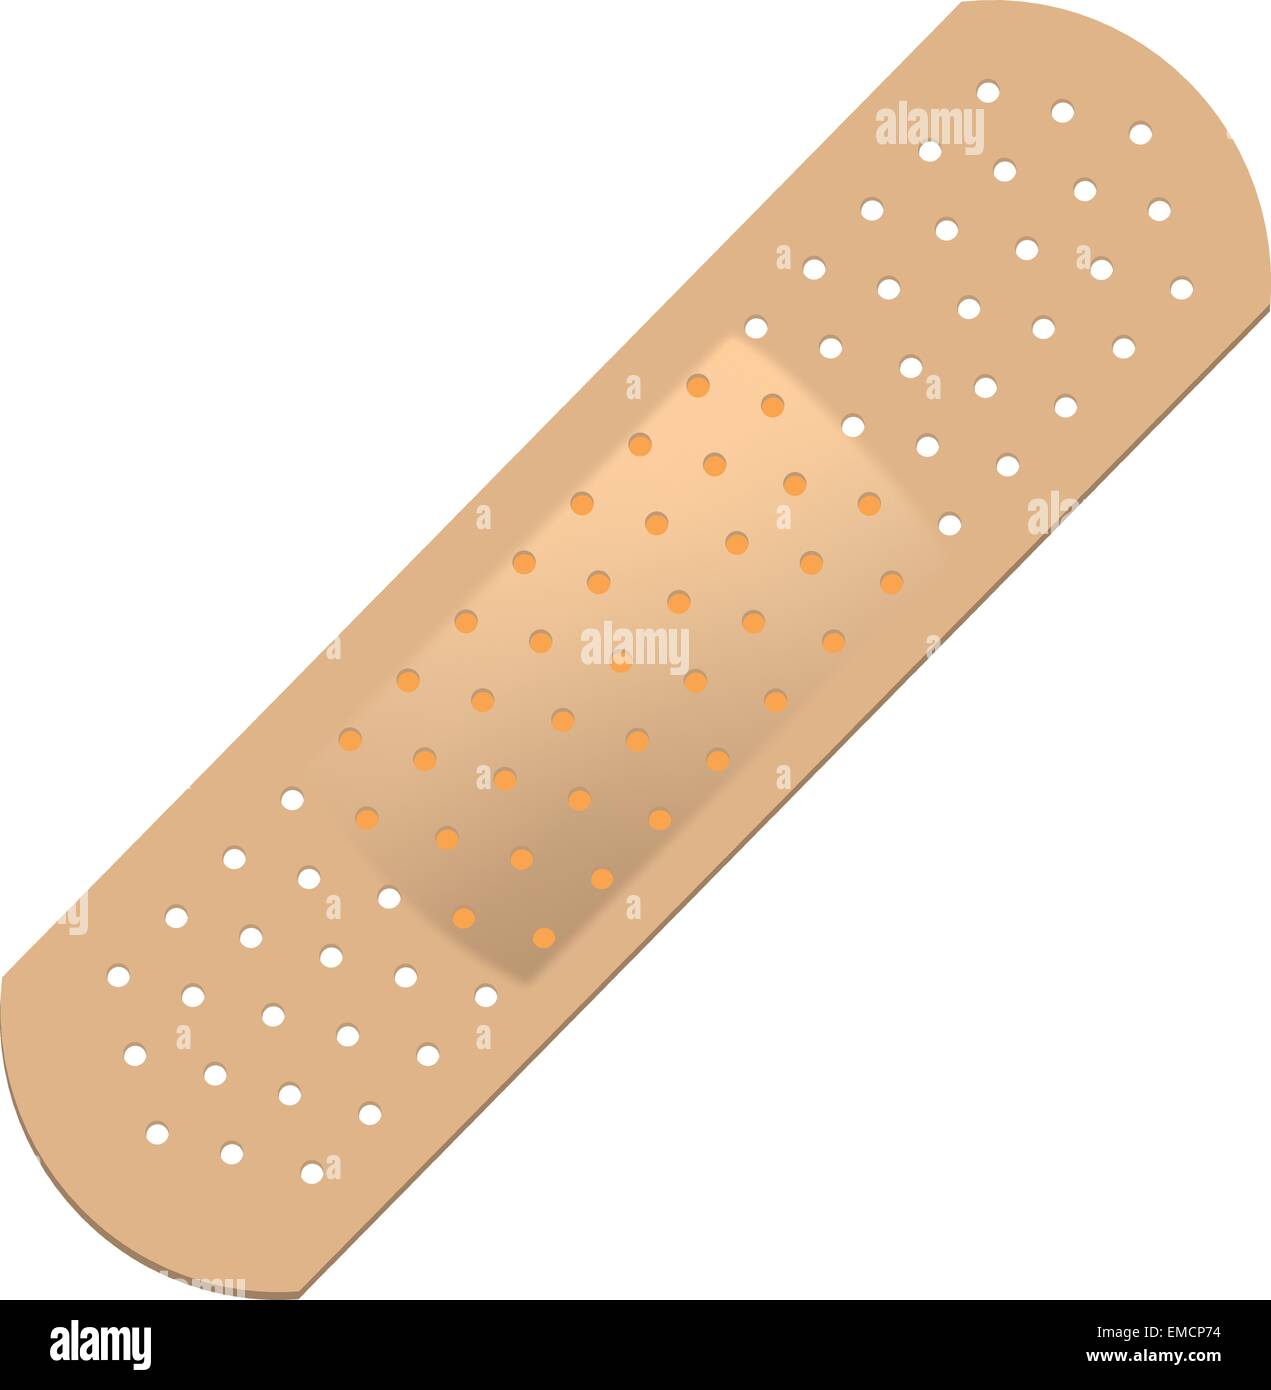 Adhesive medical plaster strip bandage. Medical patch aid strip Stock  Vector